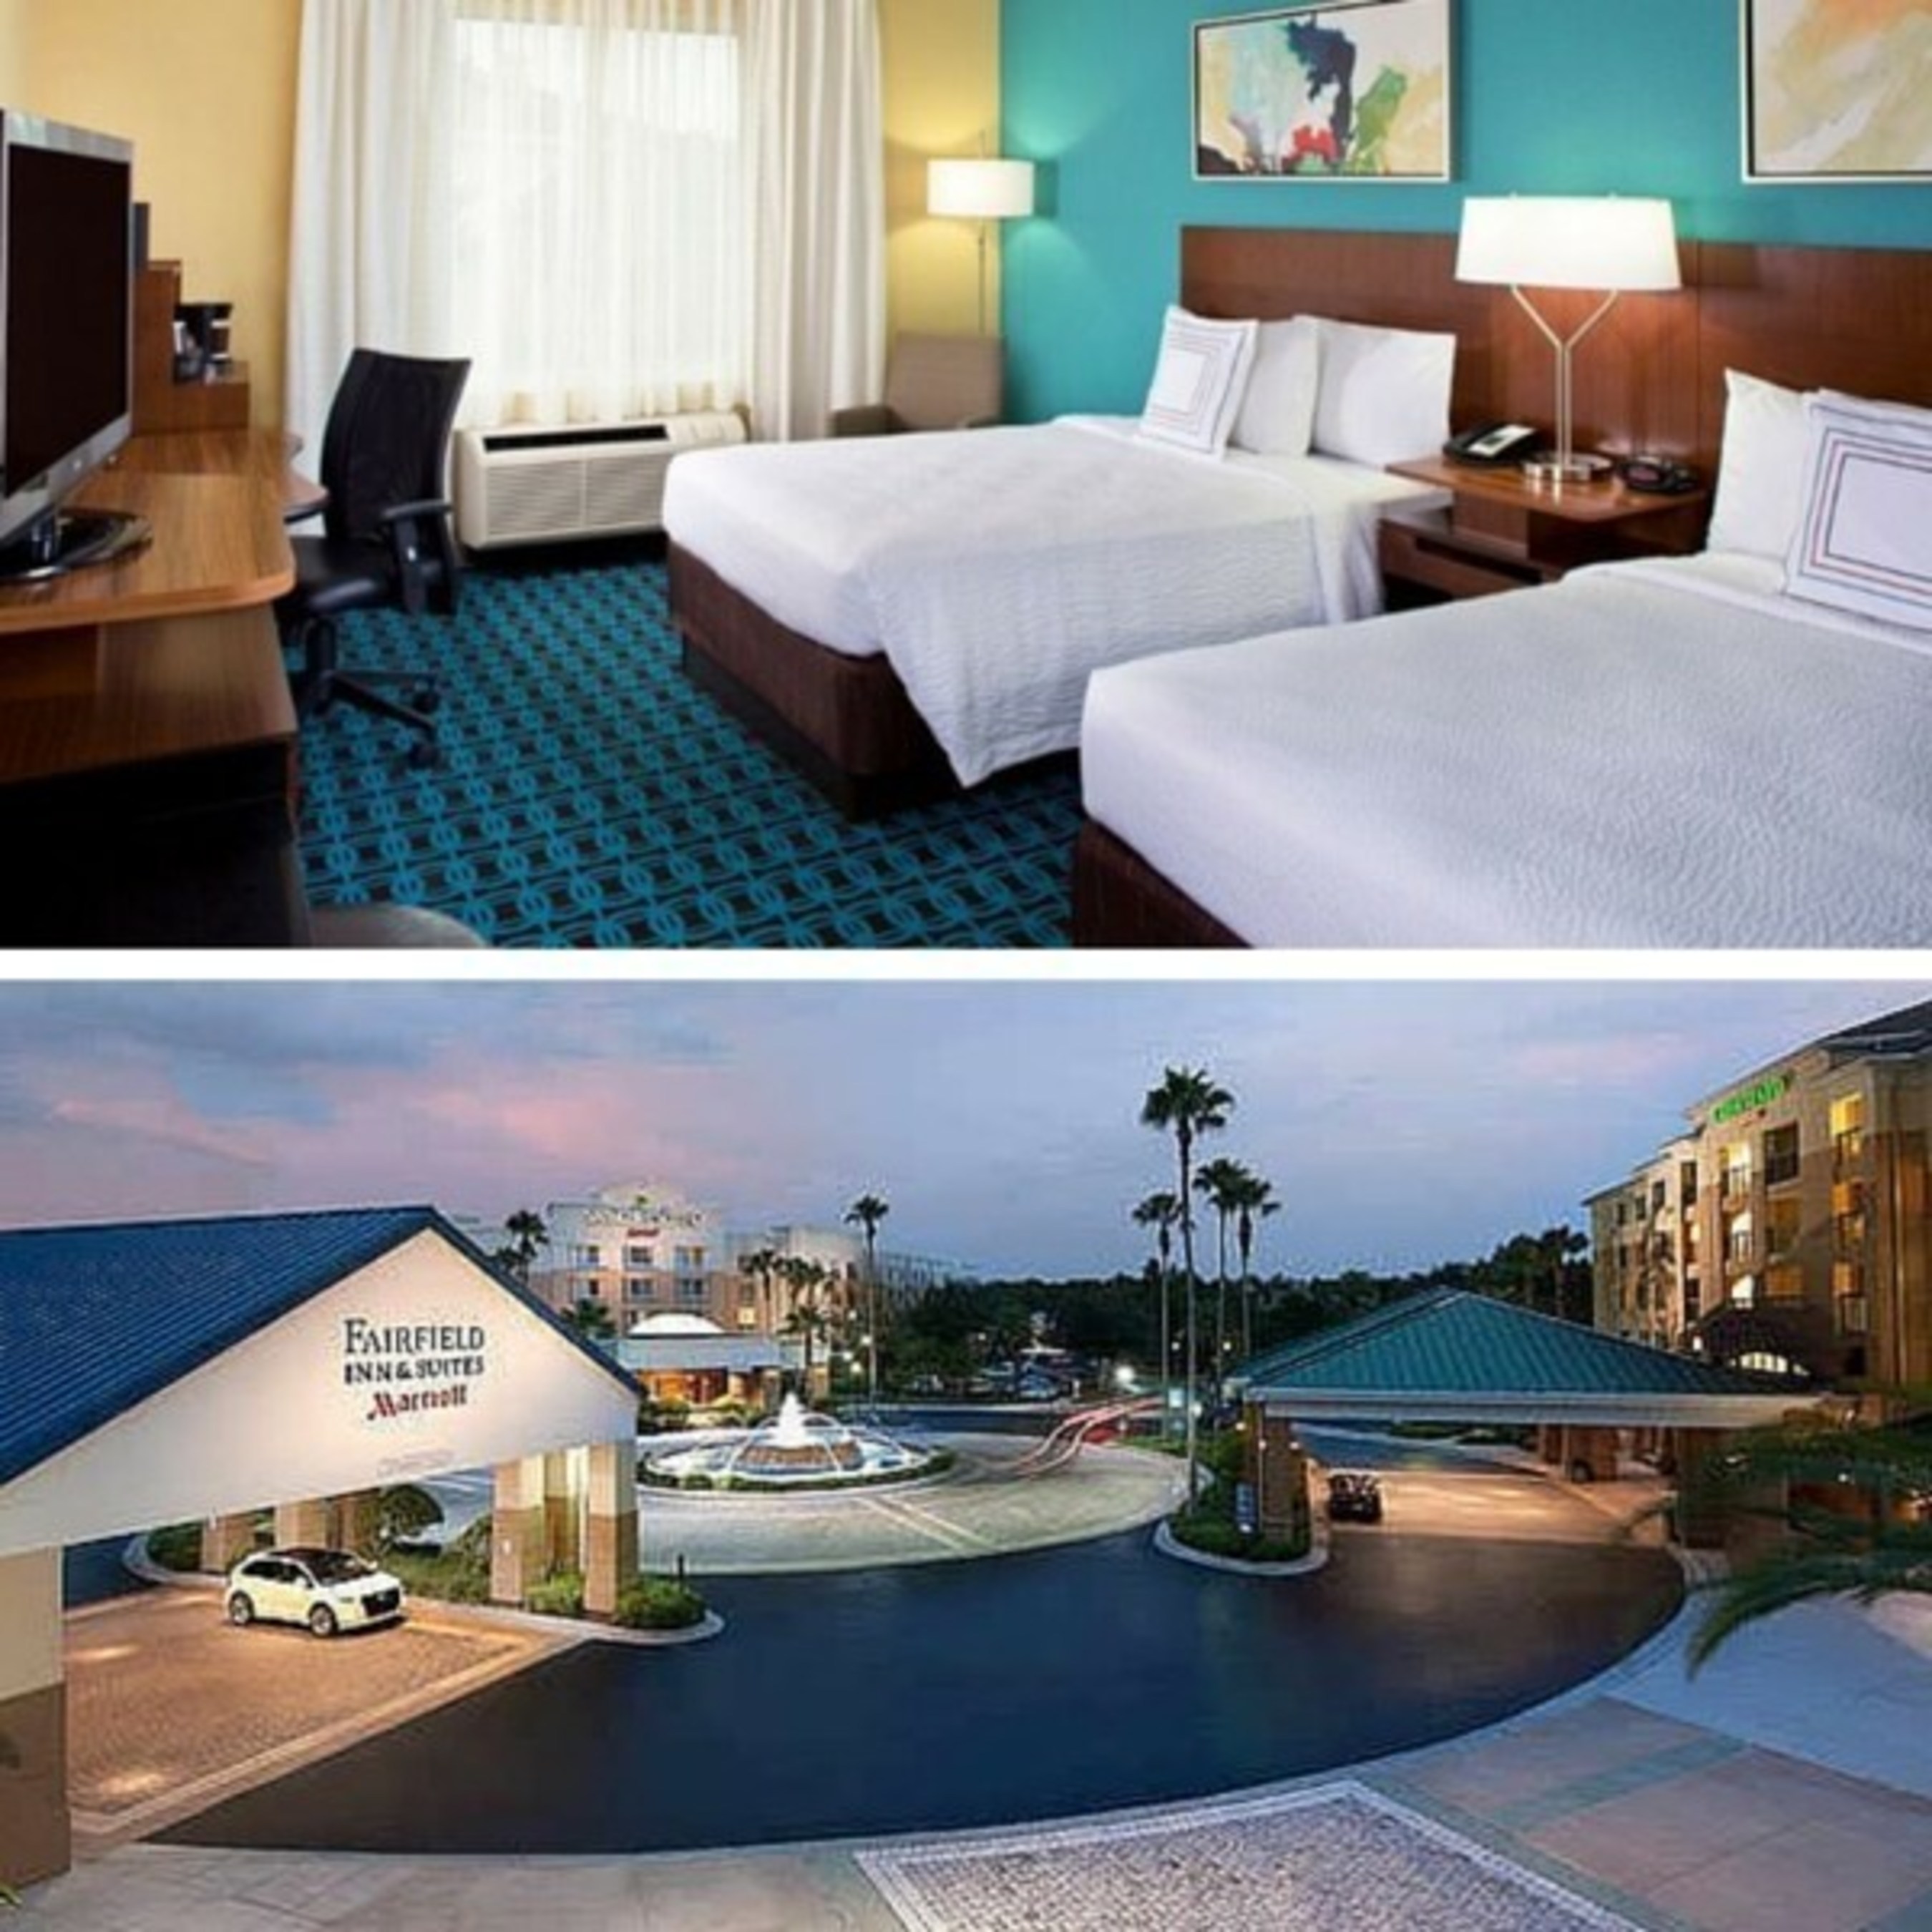 Orlando Marriott Village hotels are offering a three-night Walt Disney World(R) Theme Park package just in time for the annual Epcot(R) International Flower & Garden Festival. For information, visit www.marriott.com/MCOLY for Courtyard, www.marriott.com/MCOLX for SpringHill Suites and www.marriott.com/MCOLZ for Fairfield Inn. Reservations for all hotels can be made at 1-407-938-9001.